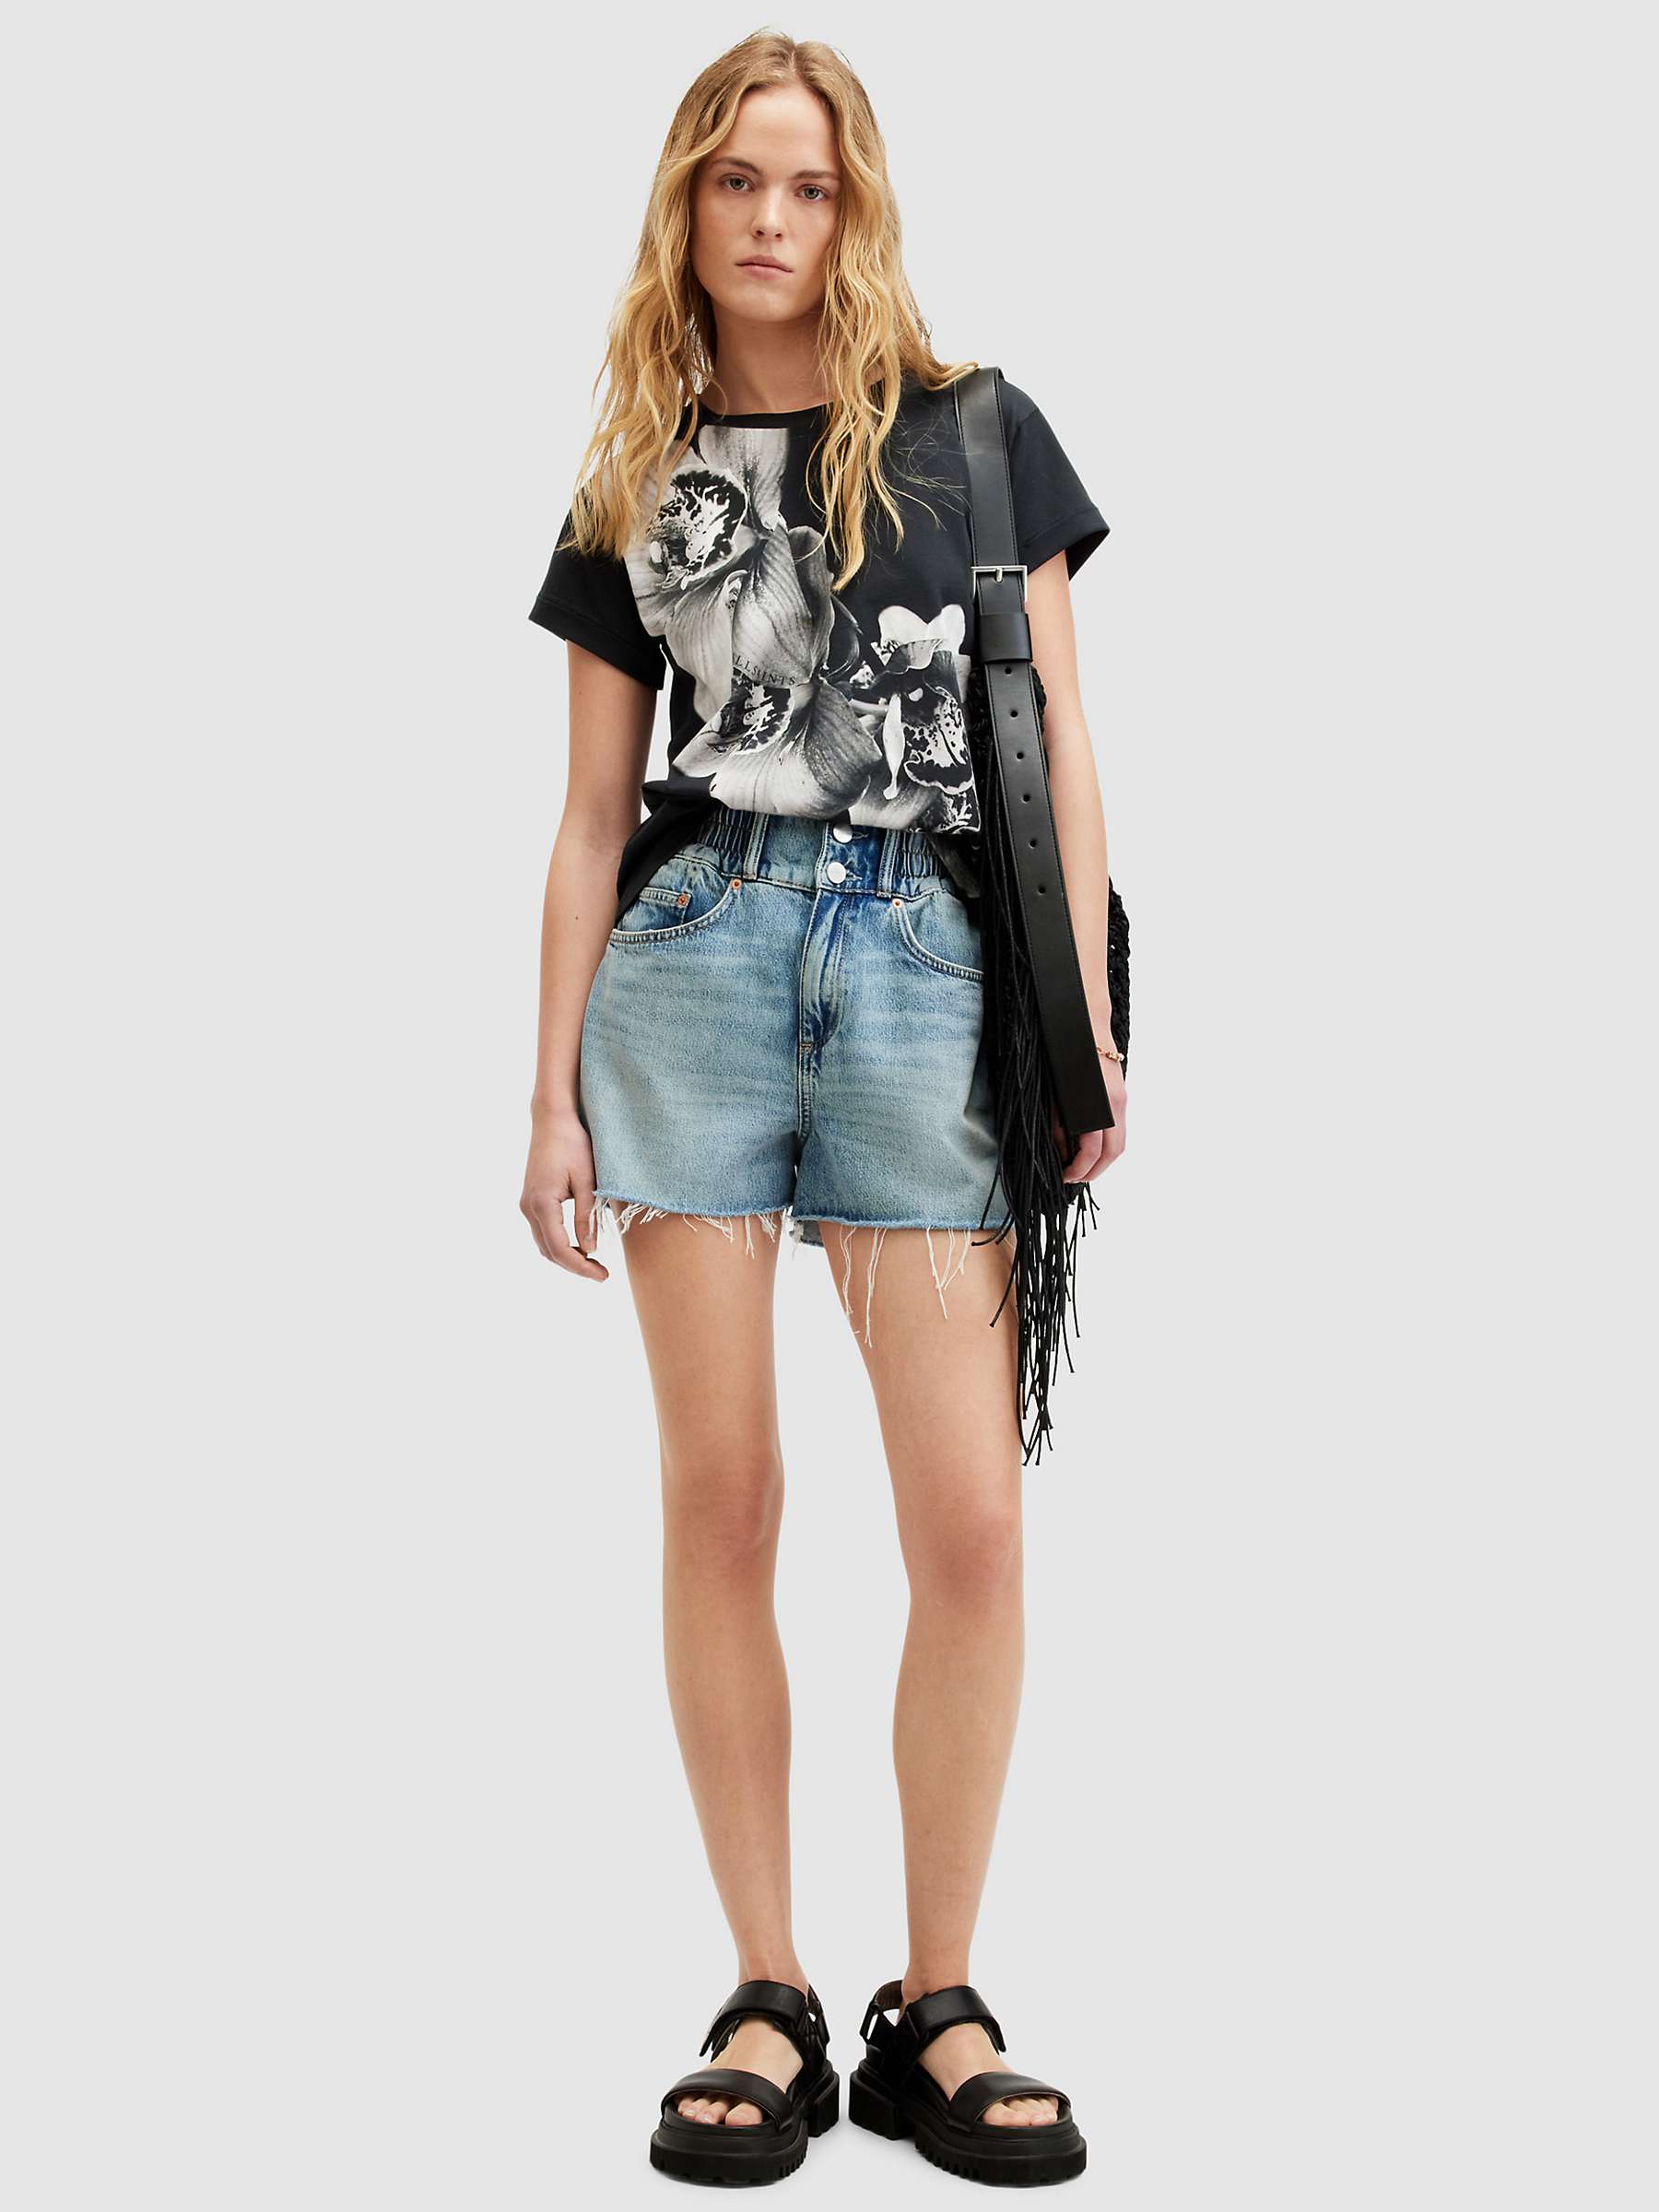 Buy AllSaints Eulo Anna Orchid Print T-Shirt, Black/White Online at johnlewis.com